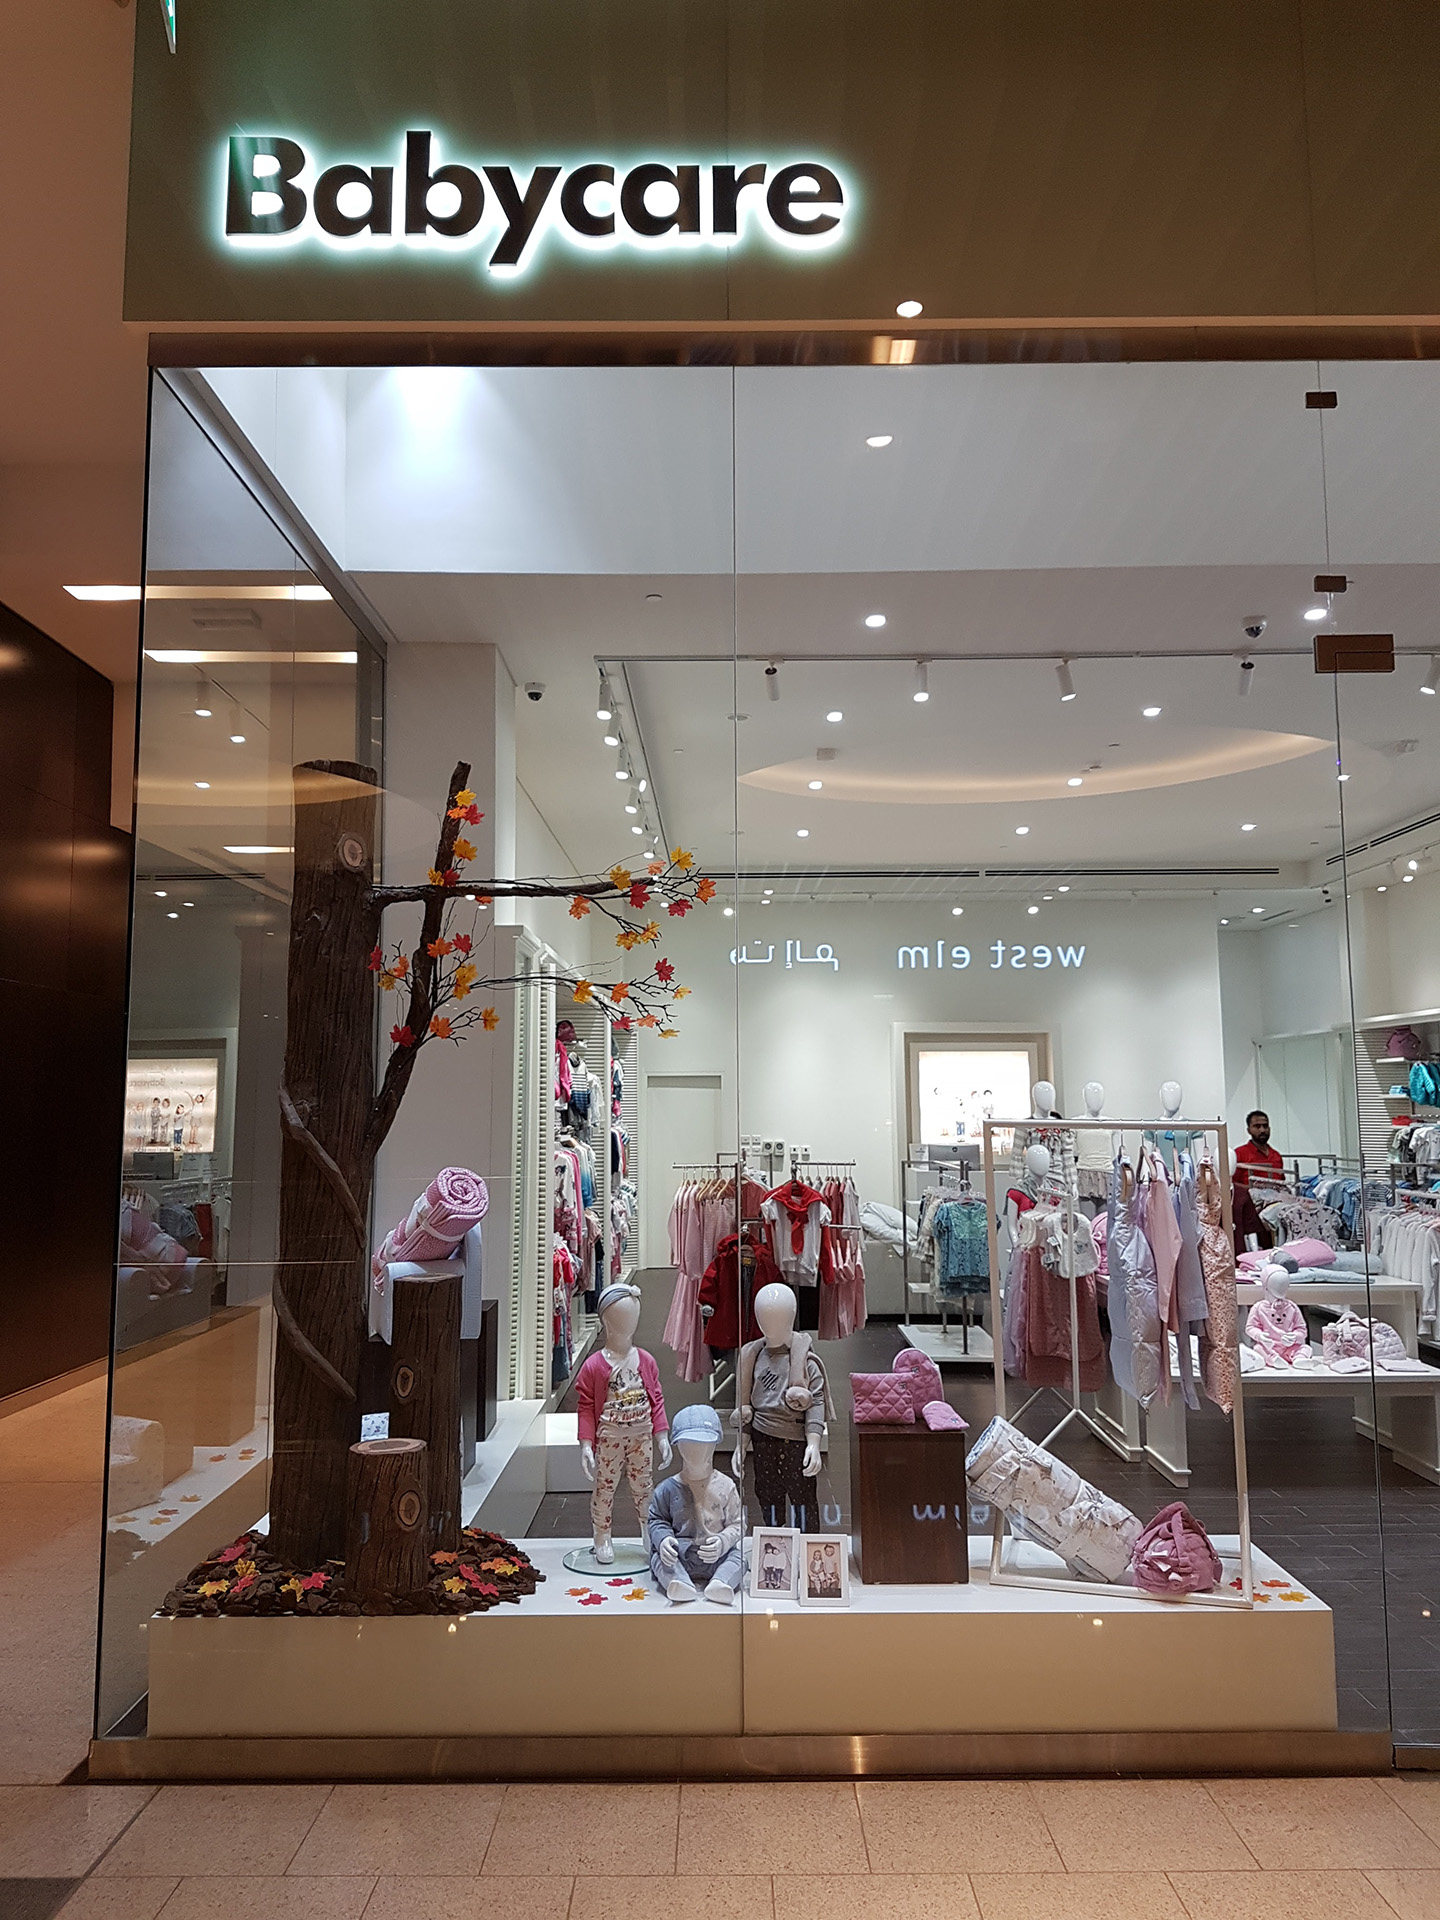 Babycare Window produced and installed by ME Visual, Qatar